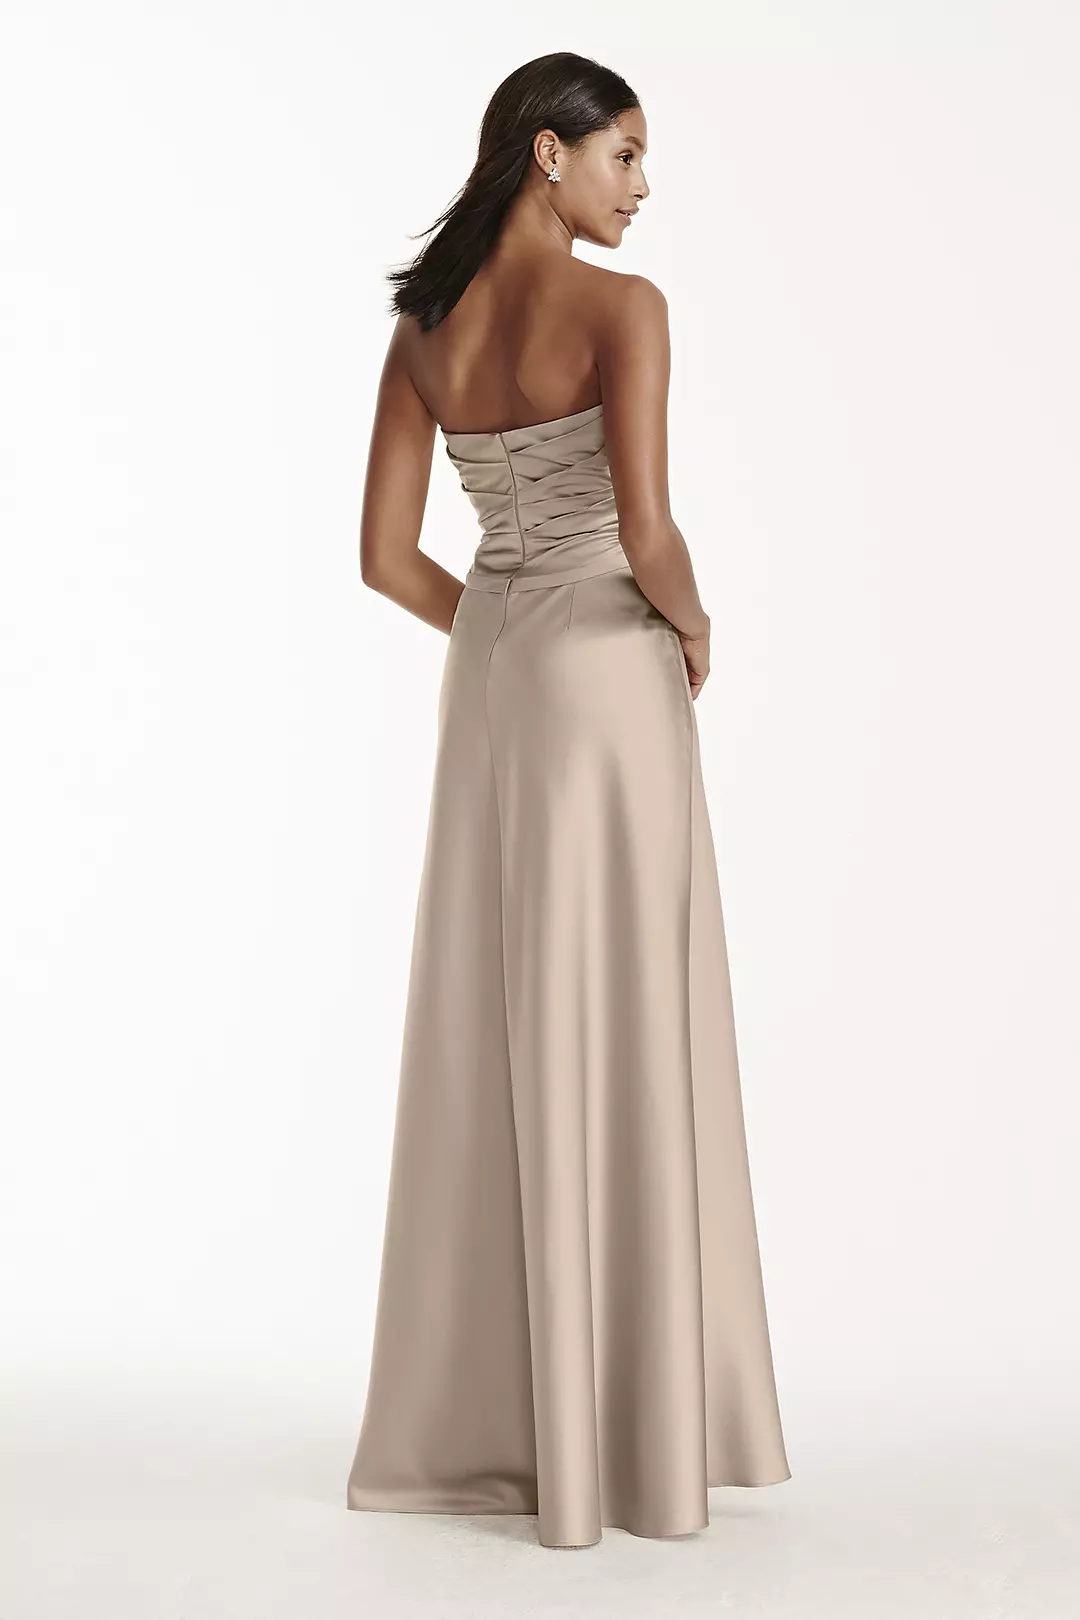 Strapless Long Satin Dress with Crystal Belt Image 2